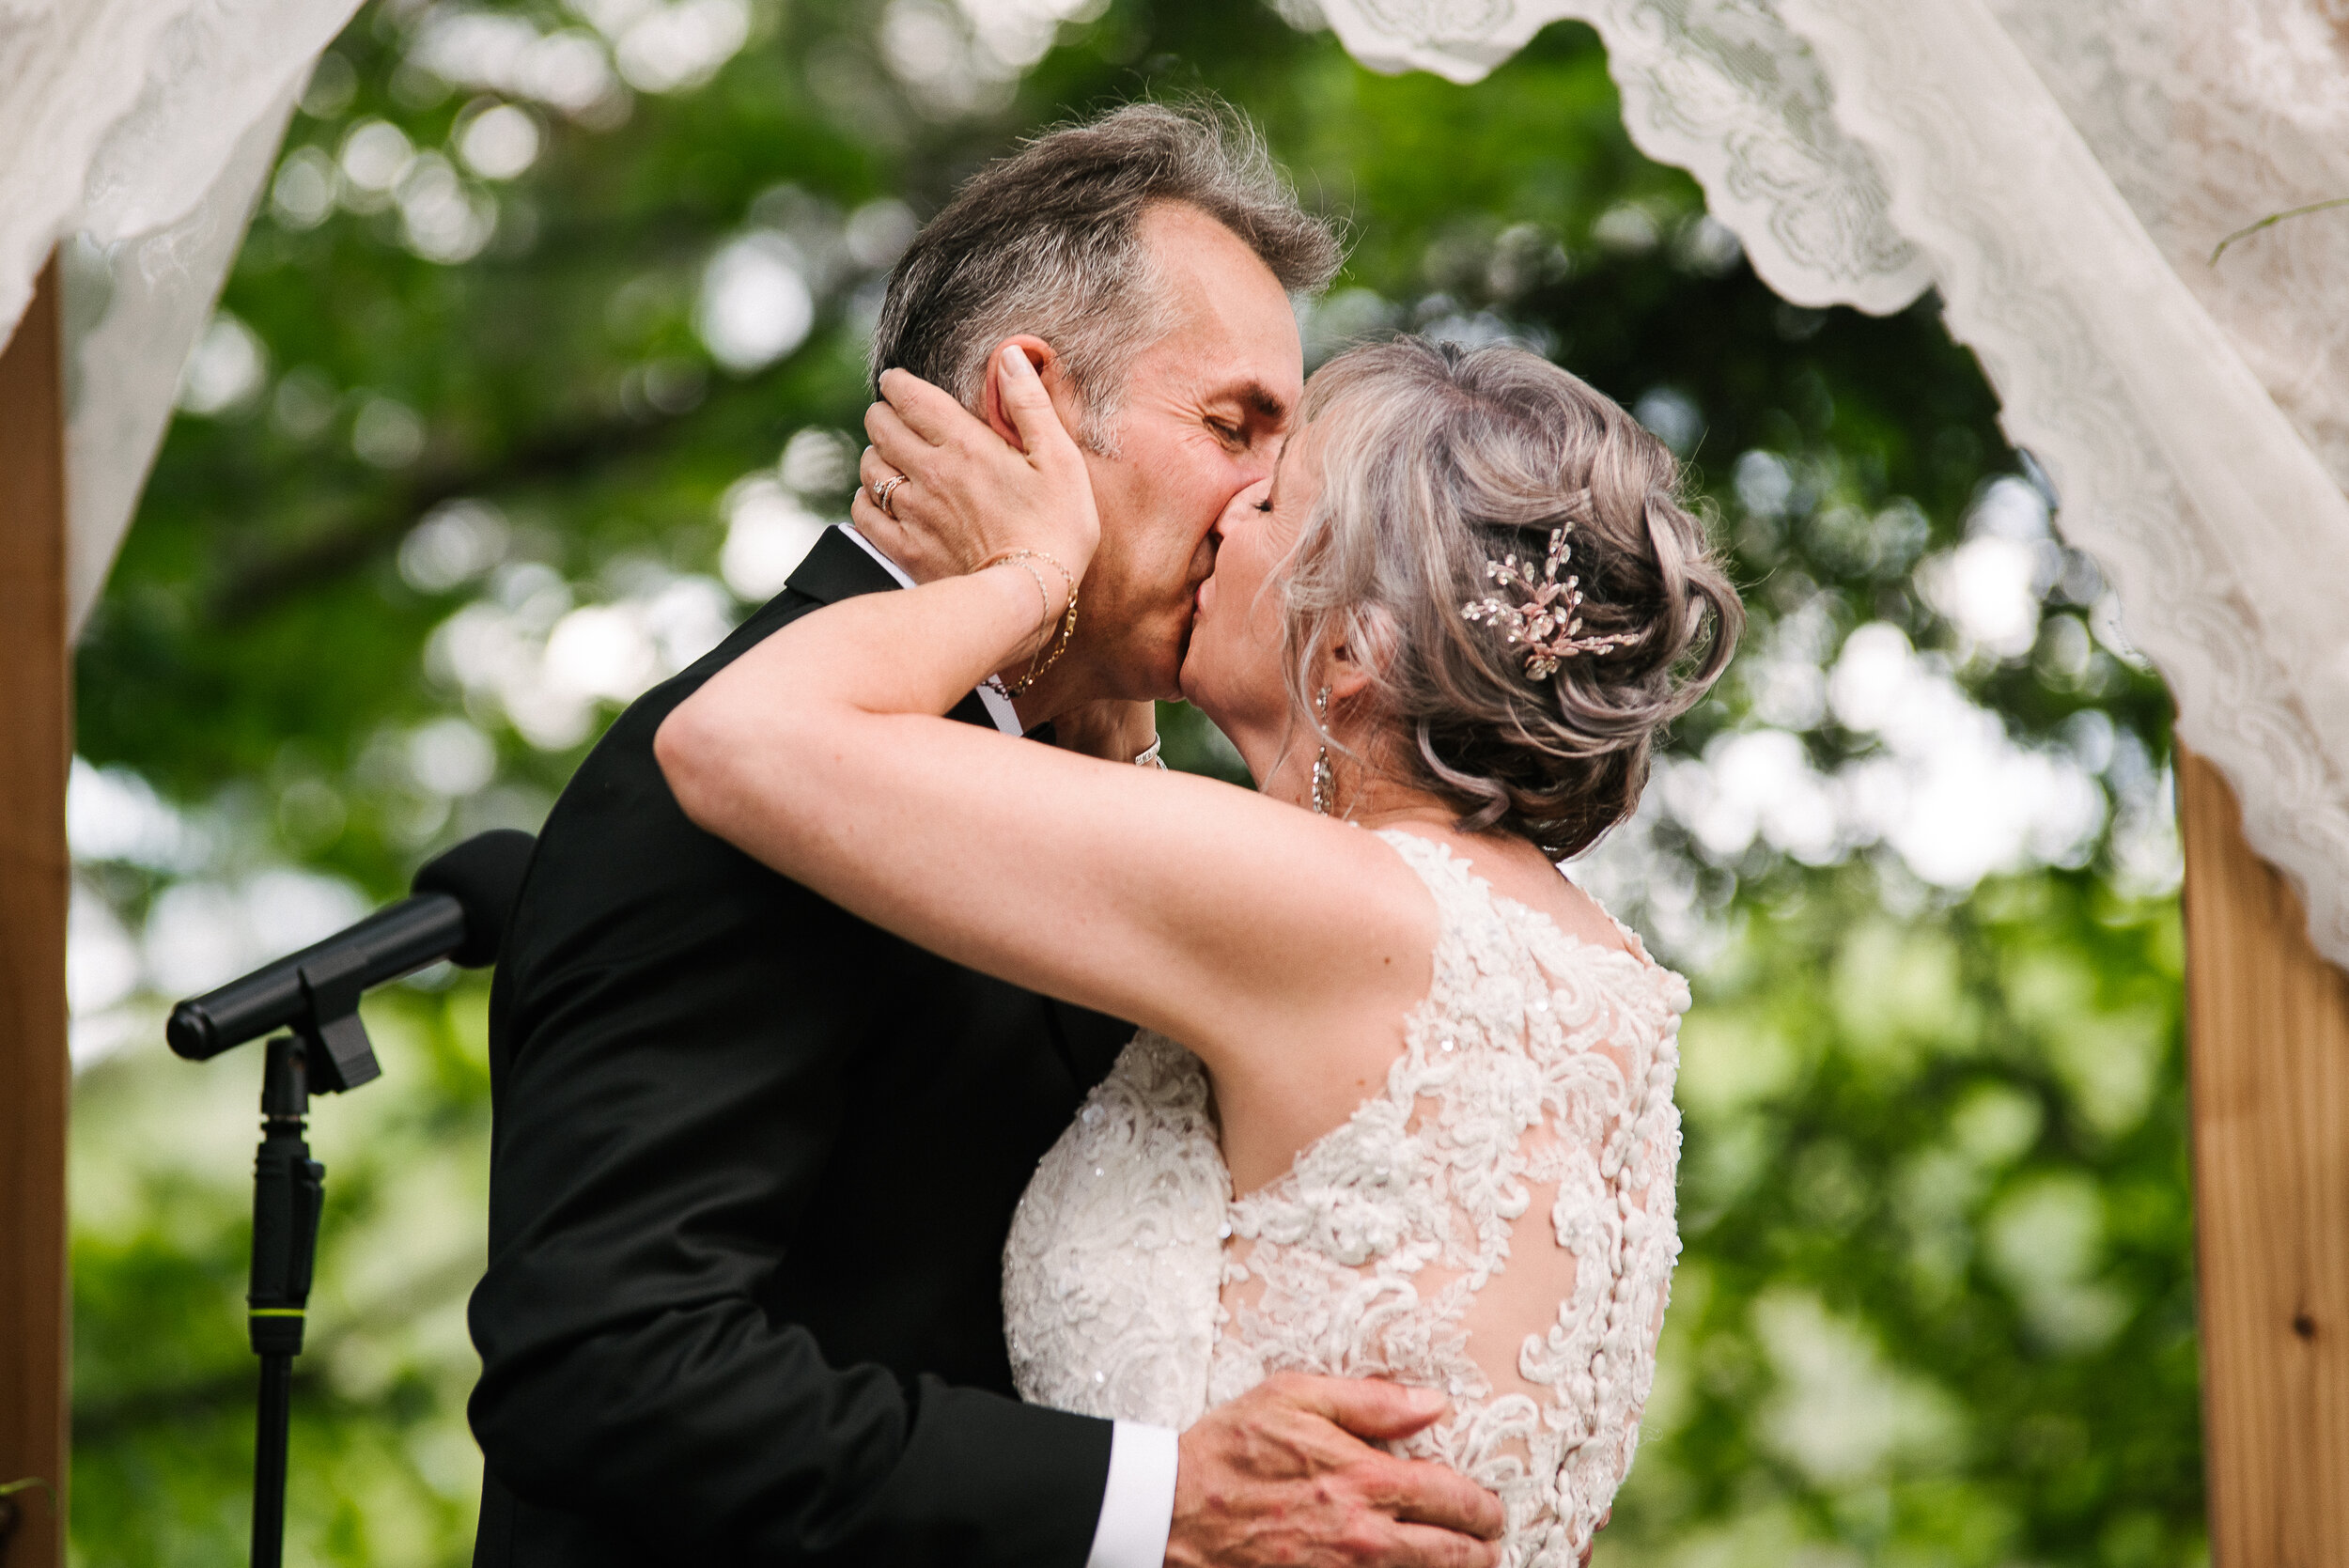 Bride and groom sharing their first married kiss at wedding in Verona, Ontario